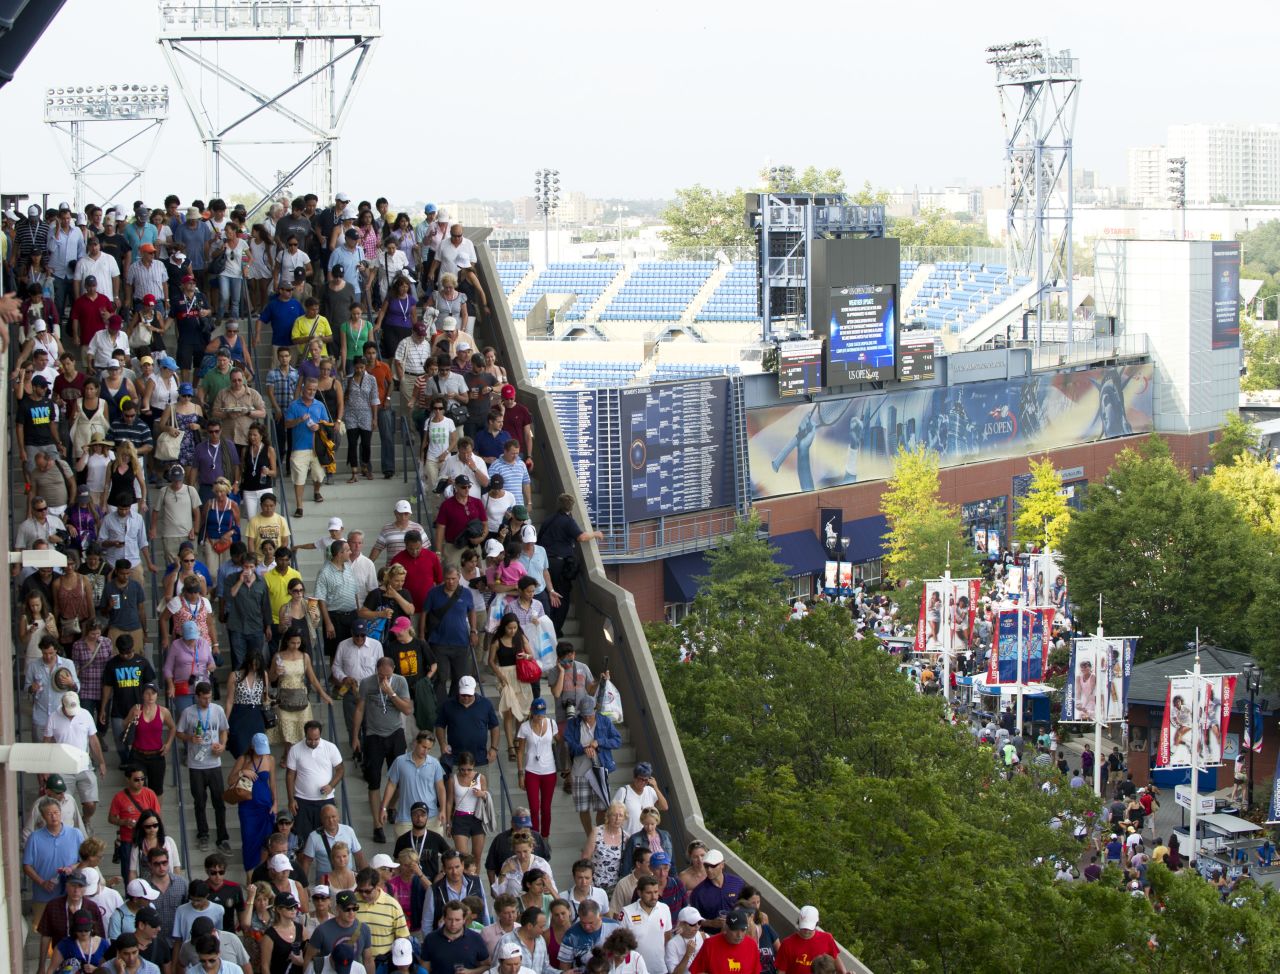 Spectators evacuate the Arthur Ashe Stadium during Ferrer and Djokovic's match as severe weather approached on Saturday. 